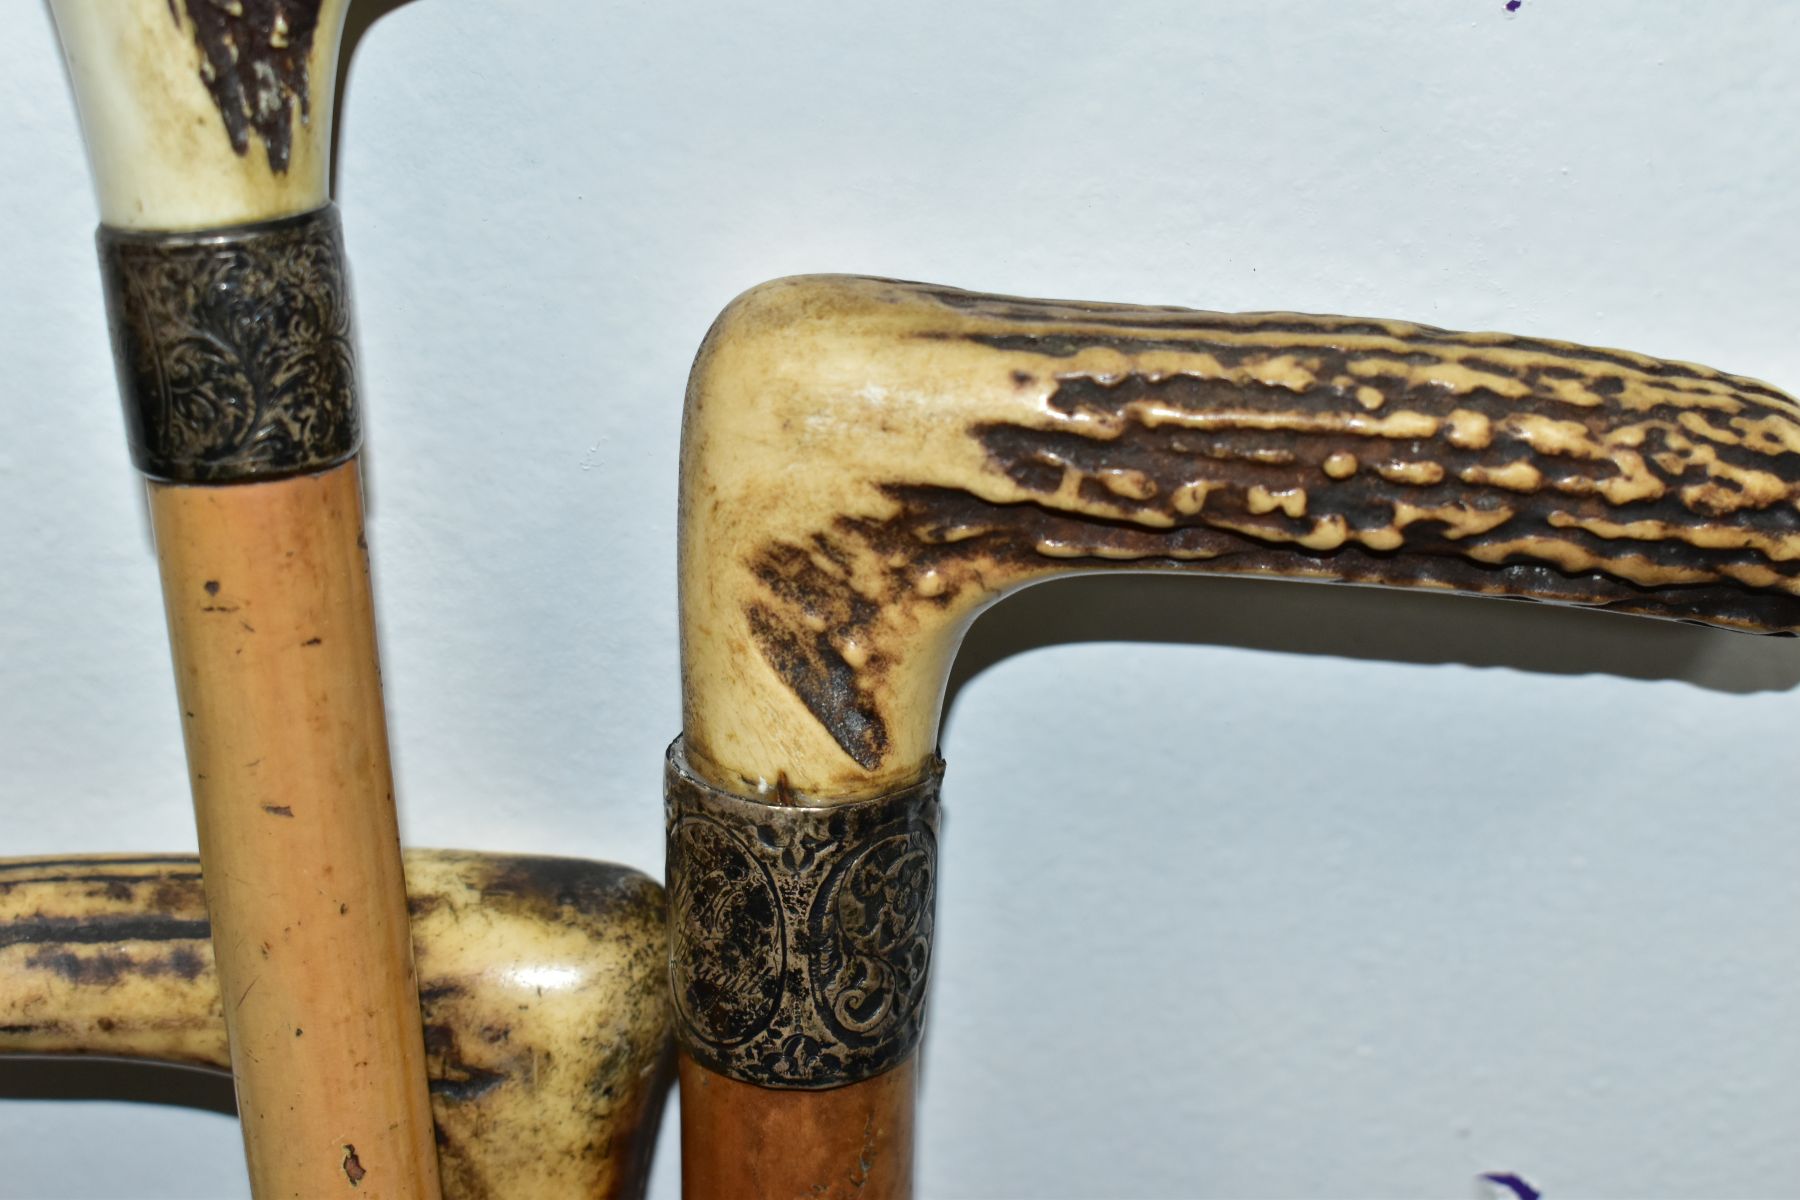 FOUR WALKING STICKS, various materials, one malacca stick, three have antler handles, one with a - Image 4 of 10